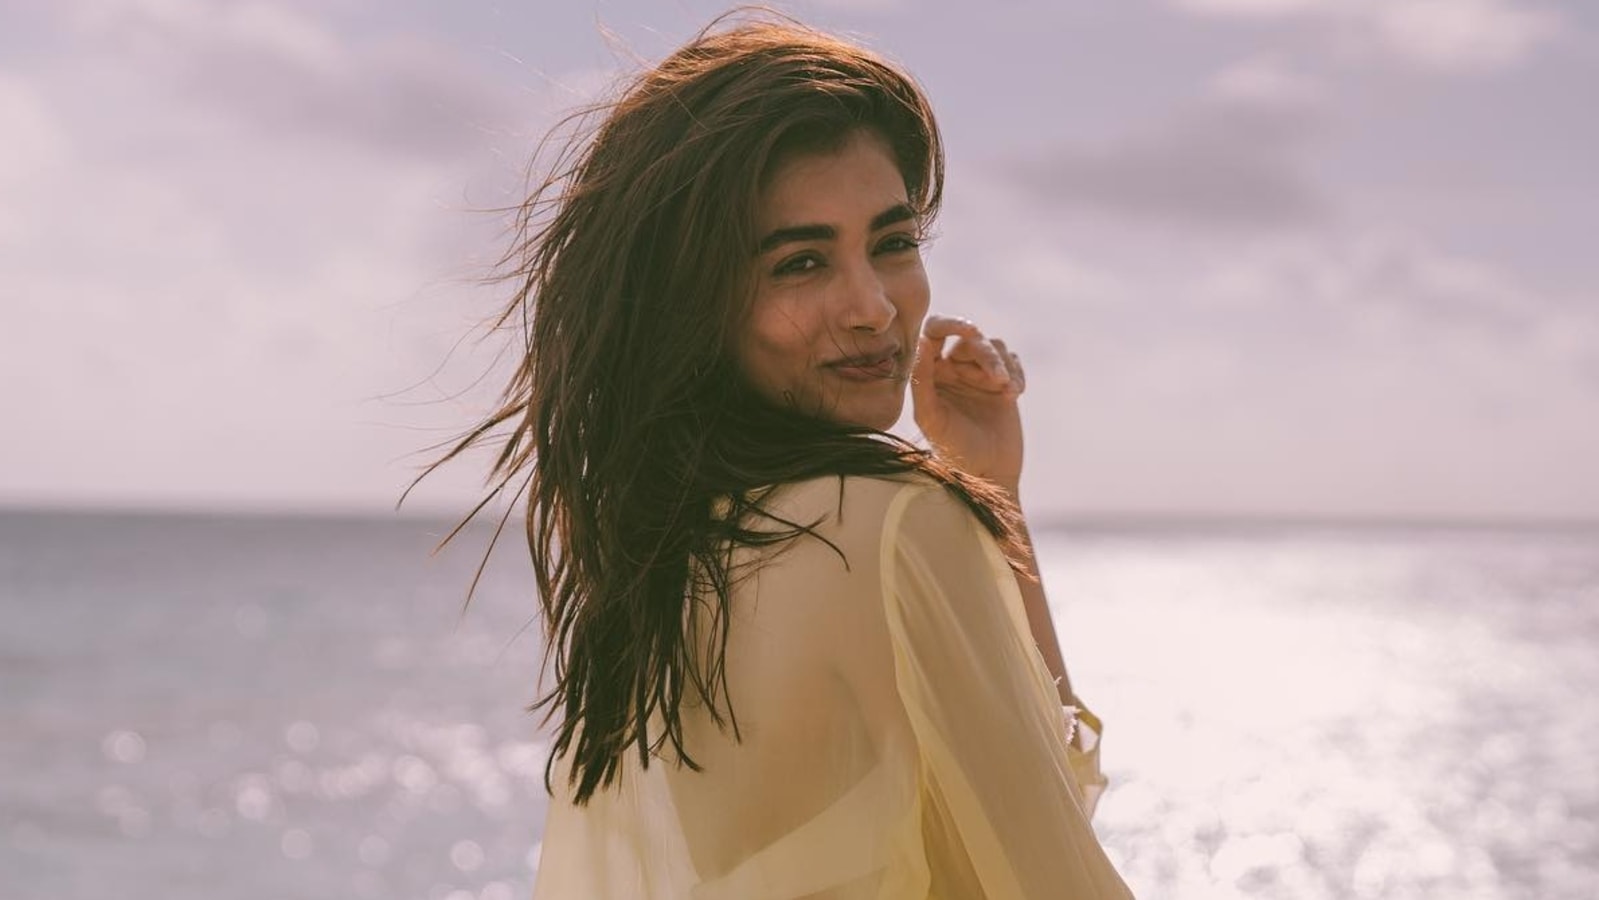 Pooja Hegde in bikini and see-through shirt gets some Vitamin D after  taking a dip in the sea: Check out photos | Fashion Trends - Hindustan Times